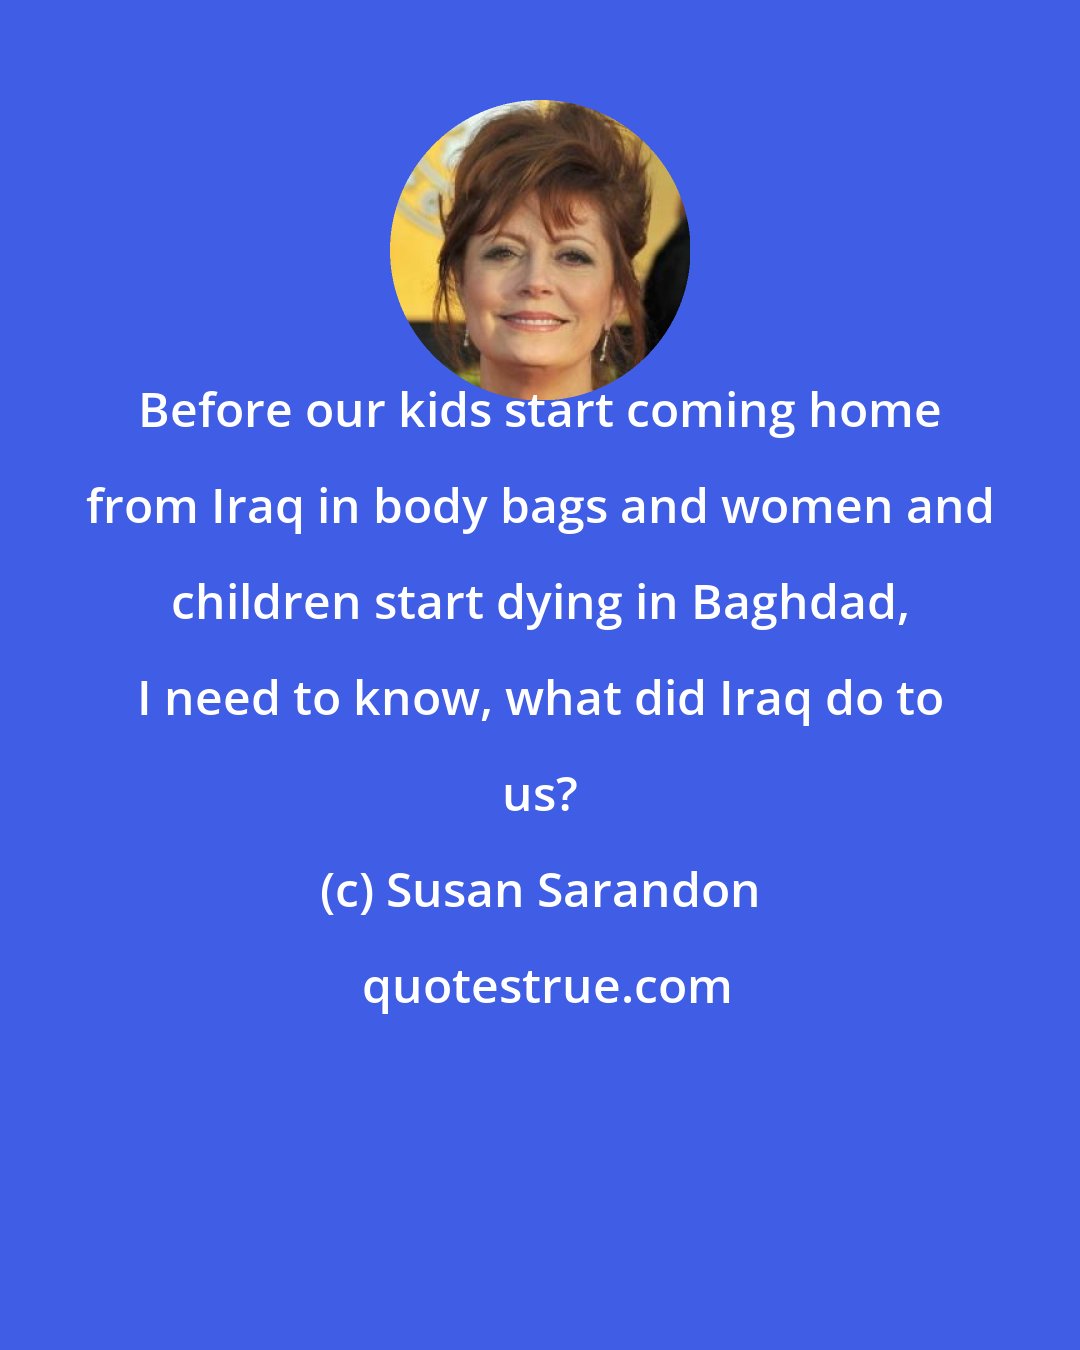 Susan Sarandon: Before our kids start coming home from Iraq in body bags and women and children start dying in Baghdad, I need to know, what did Iraq do to us?